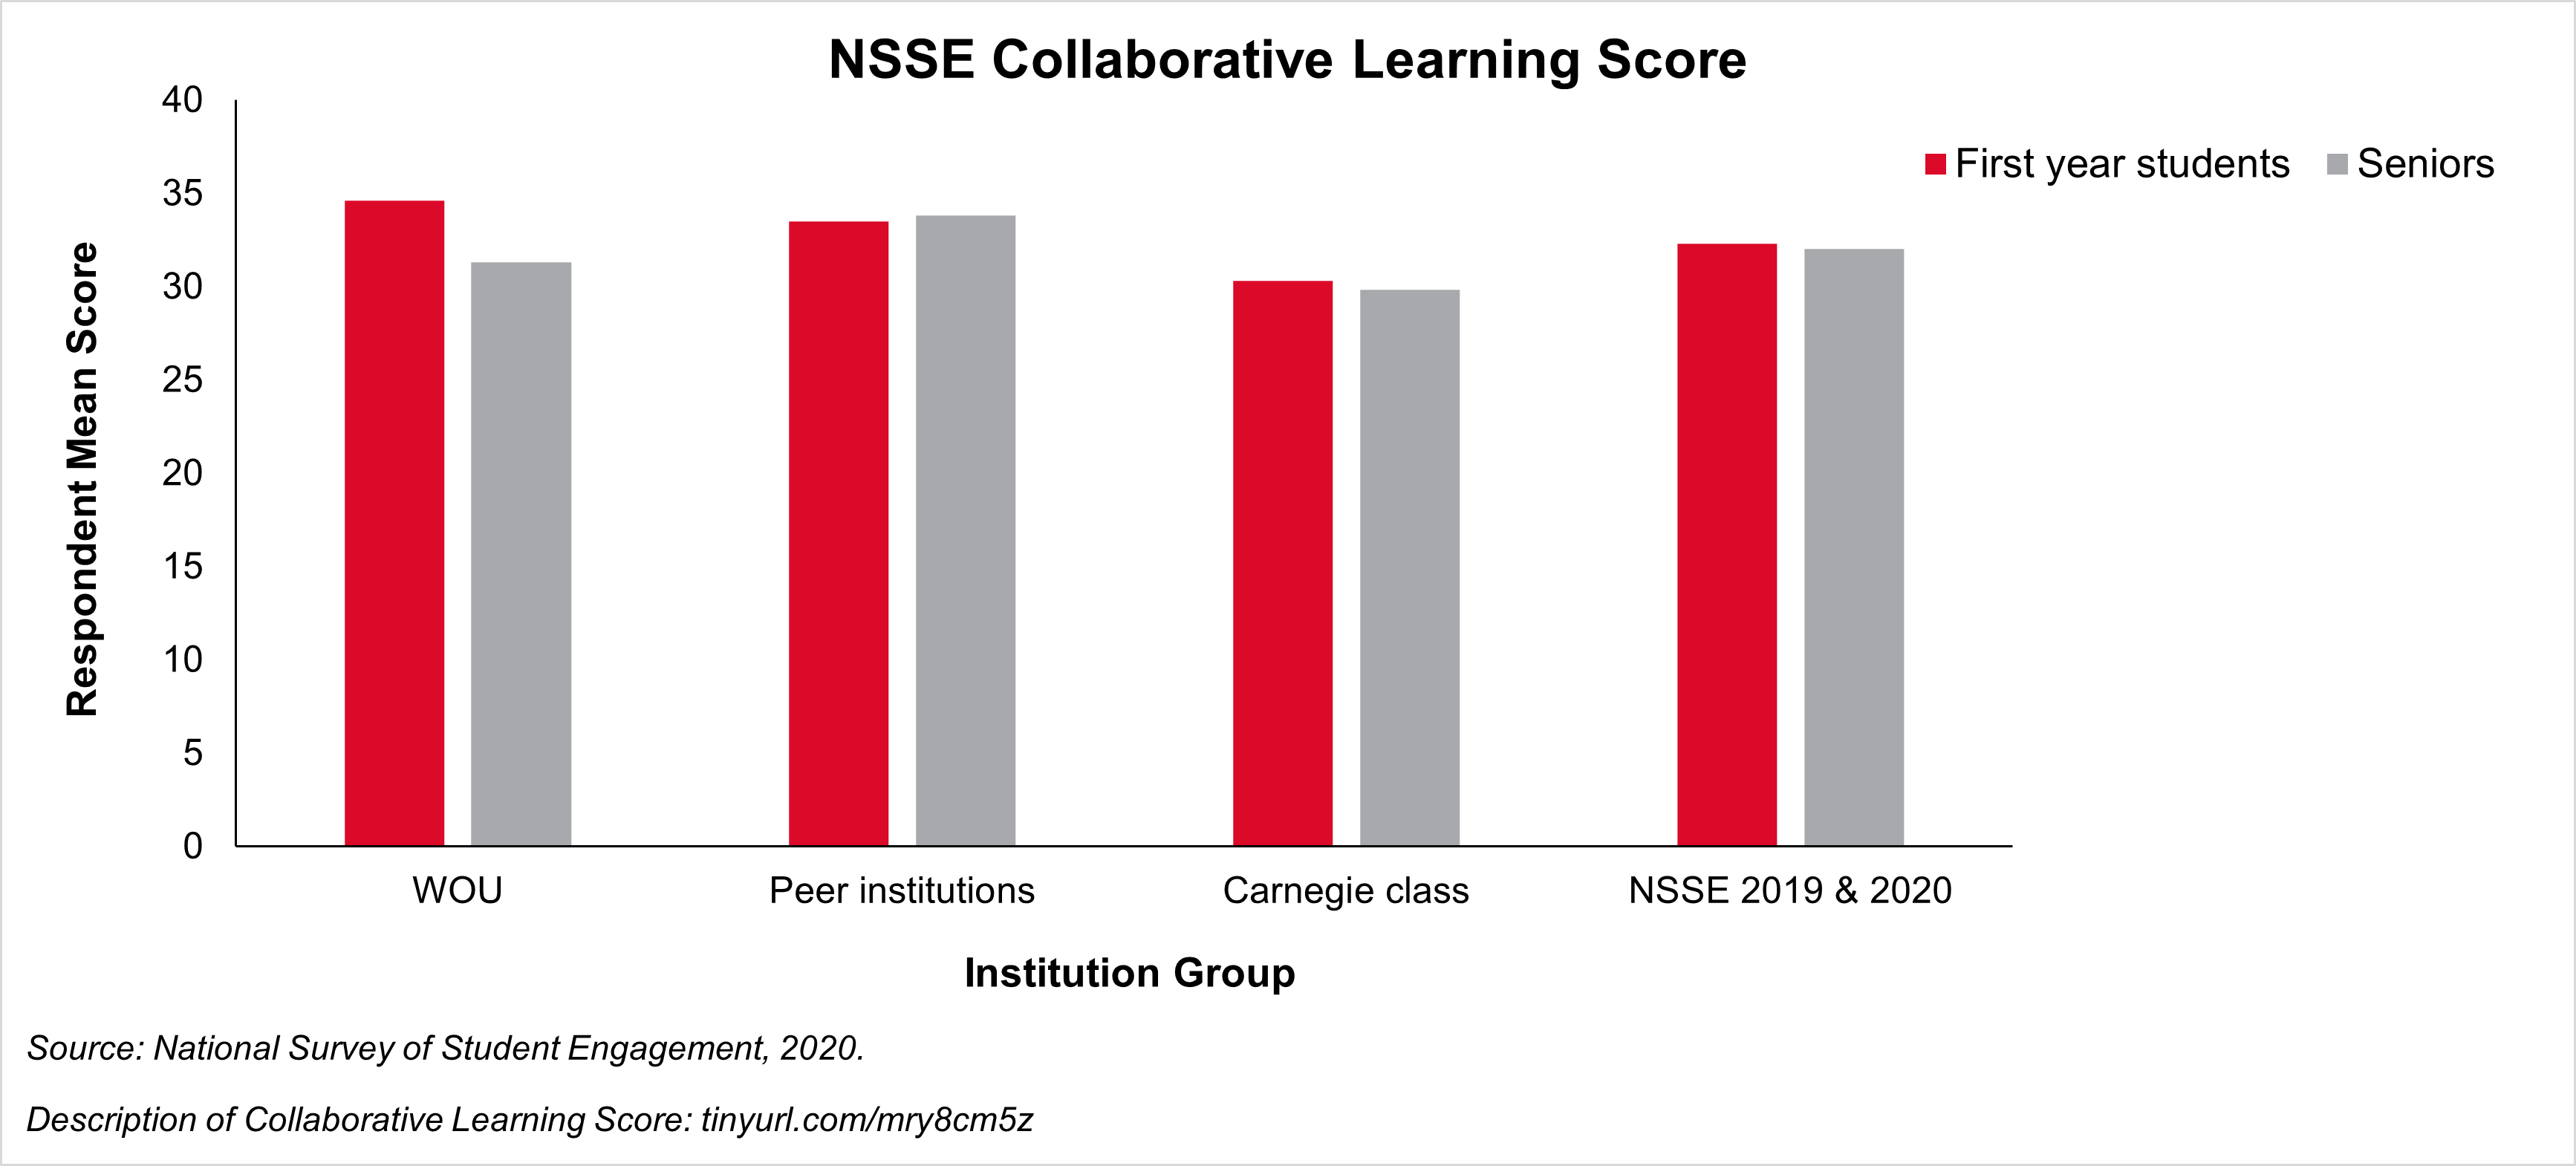 Bar chart comparing respondents' mean NSSE collaborative learning scores for first years and seniors at WOU, peer insitutions, carnegie class insitutions, and NSEE 2019 and 2020. Mean response scores are similar between institution types. Description of score: tinyurl.com/mry8cm5z